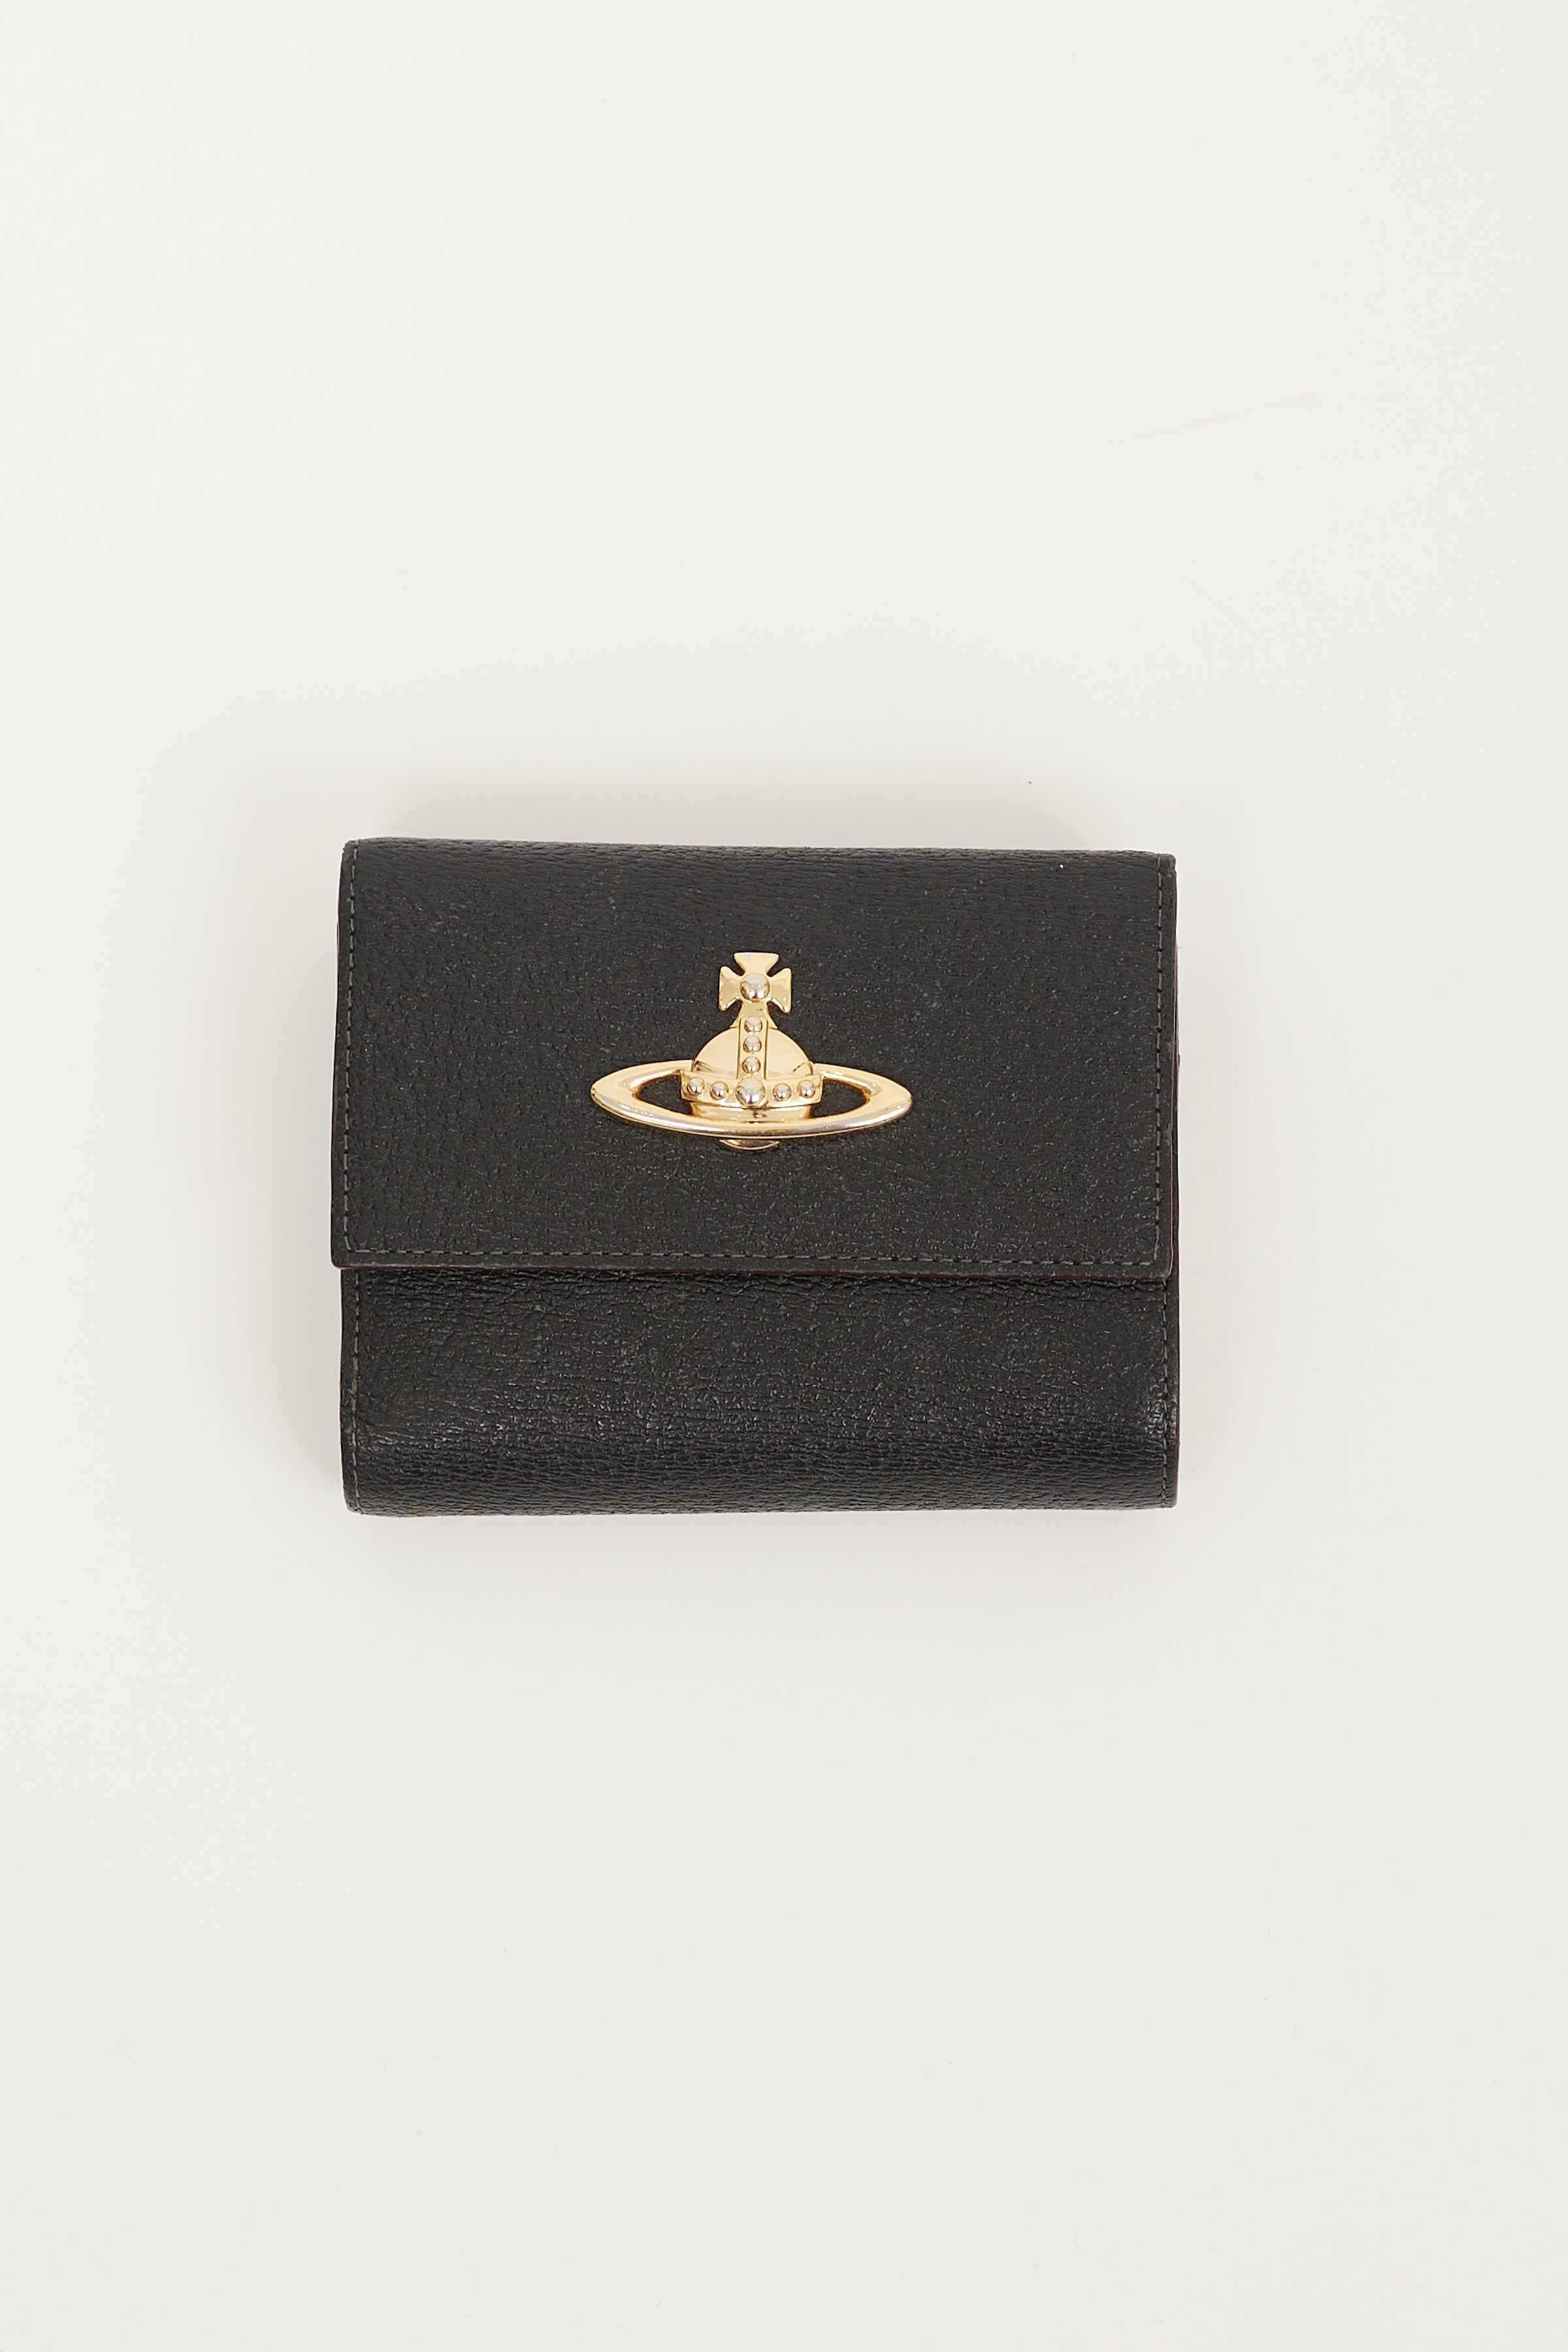 Vivienne Westwood // Black & Gold Leather Trifold Wallet – VSP Consignment